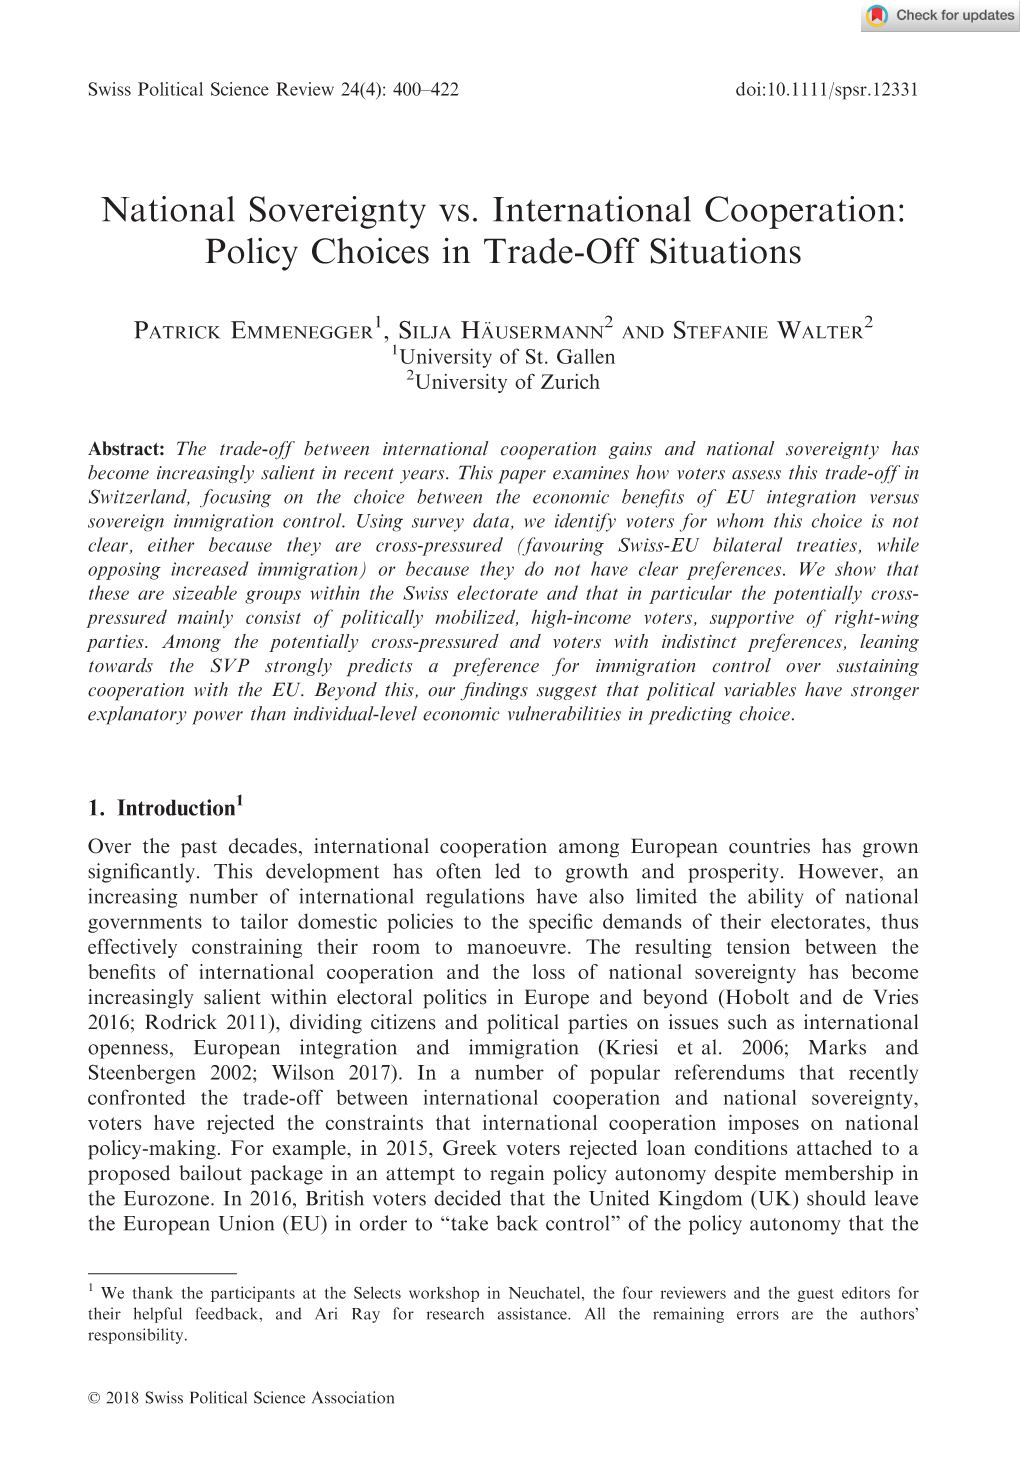 National Sovereignty Vs. International Cooperation: Policy Choices in Trade-Off Situations